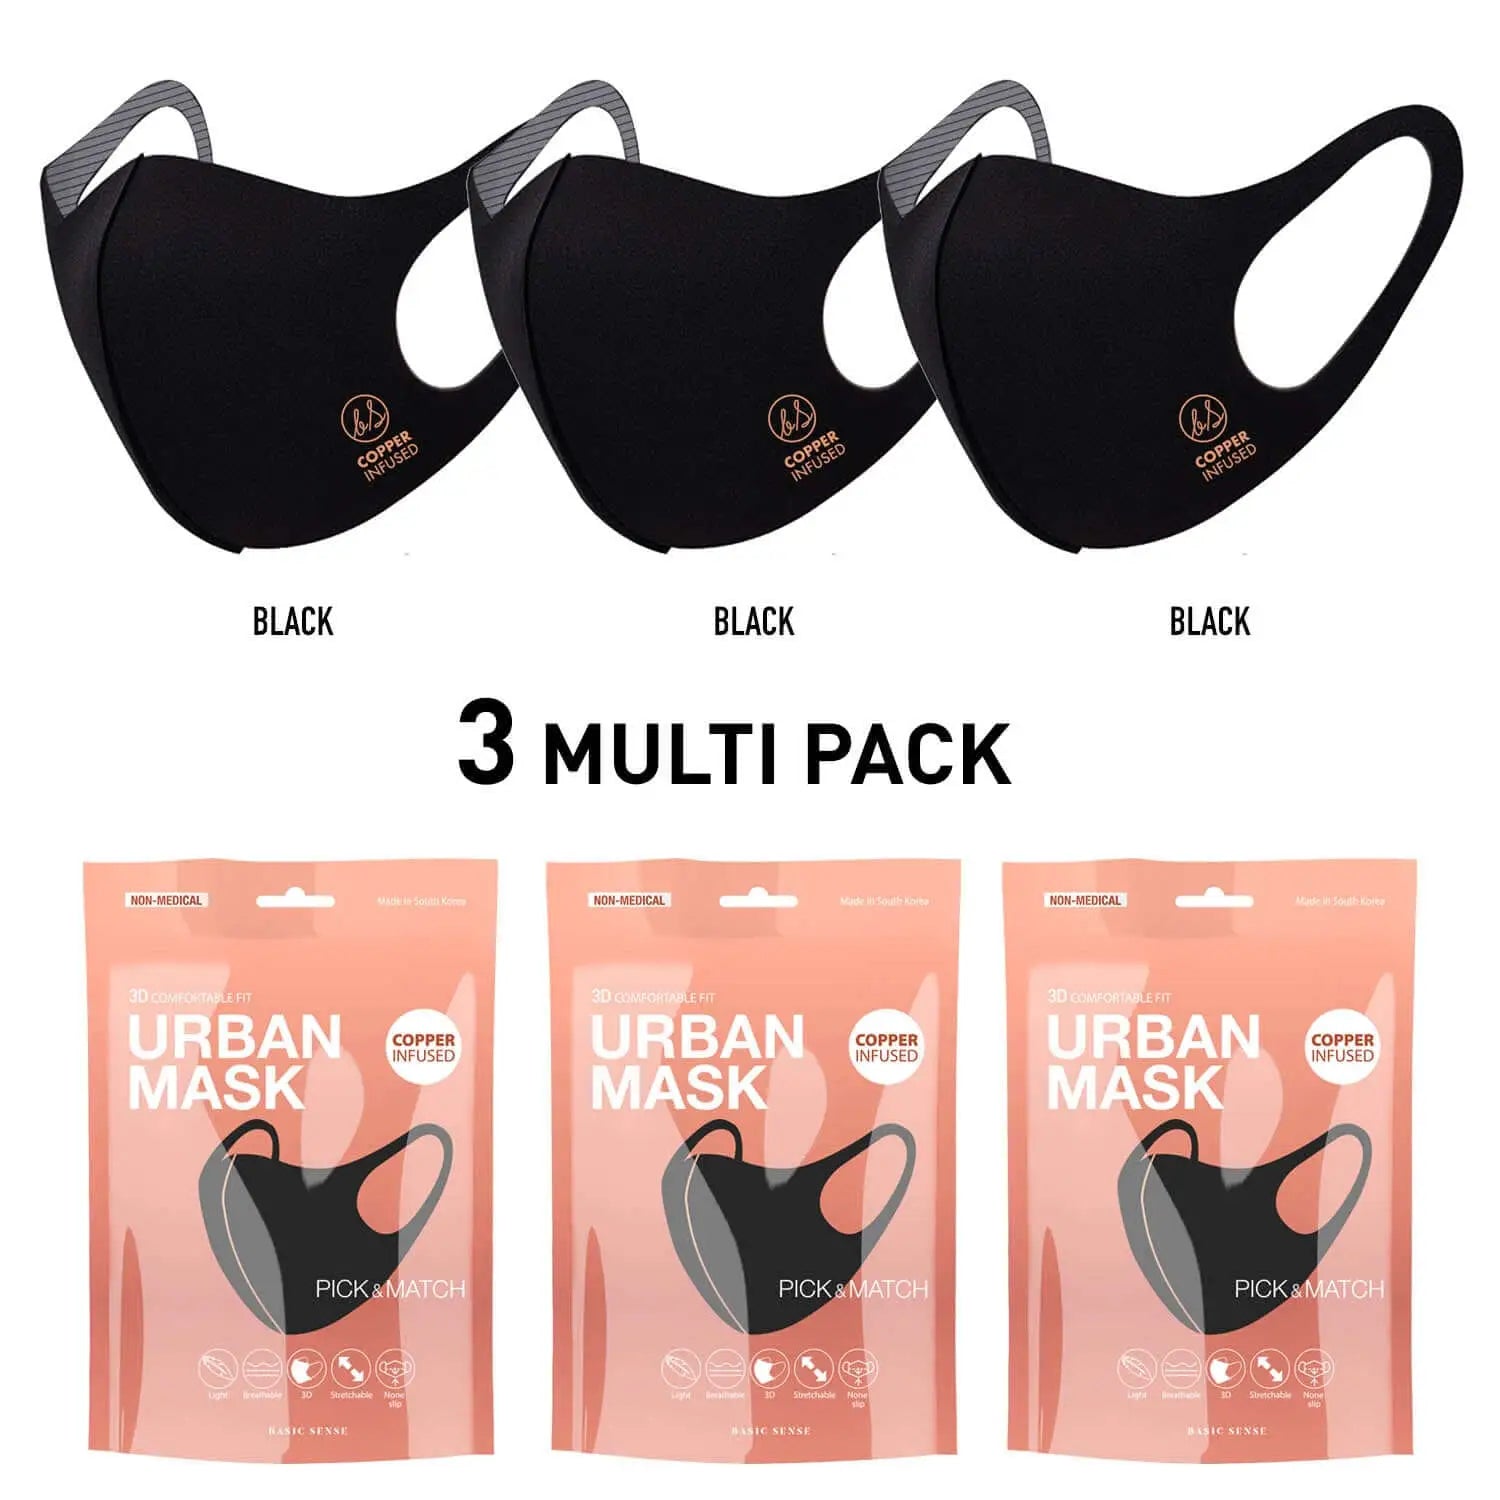 Copper-Infused 3 Pack of Black Face Masks with Filters.